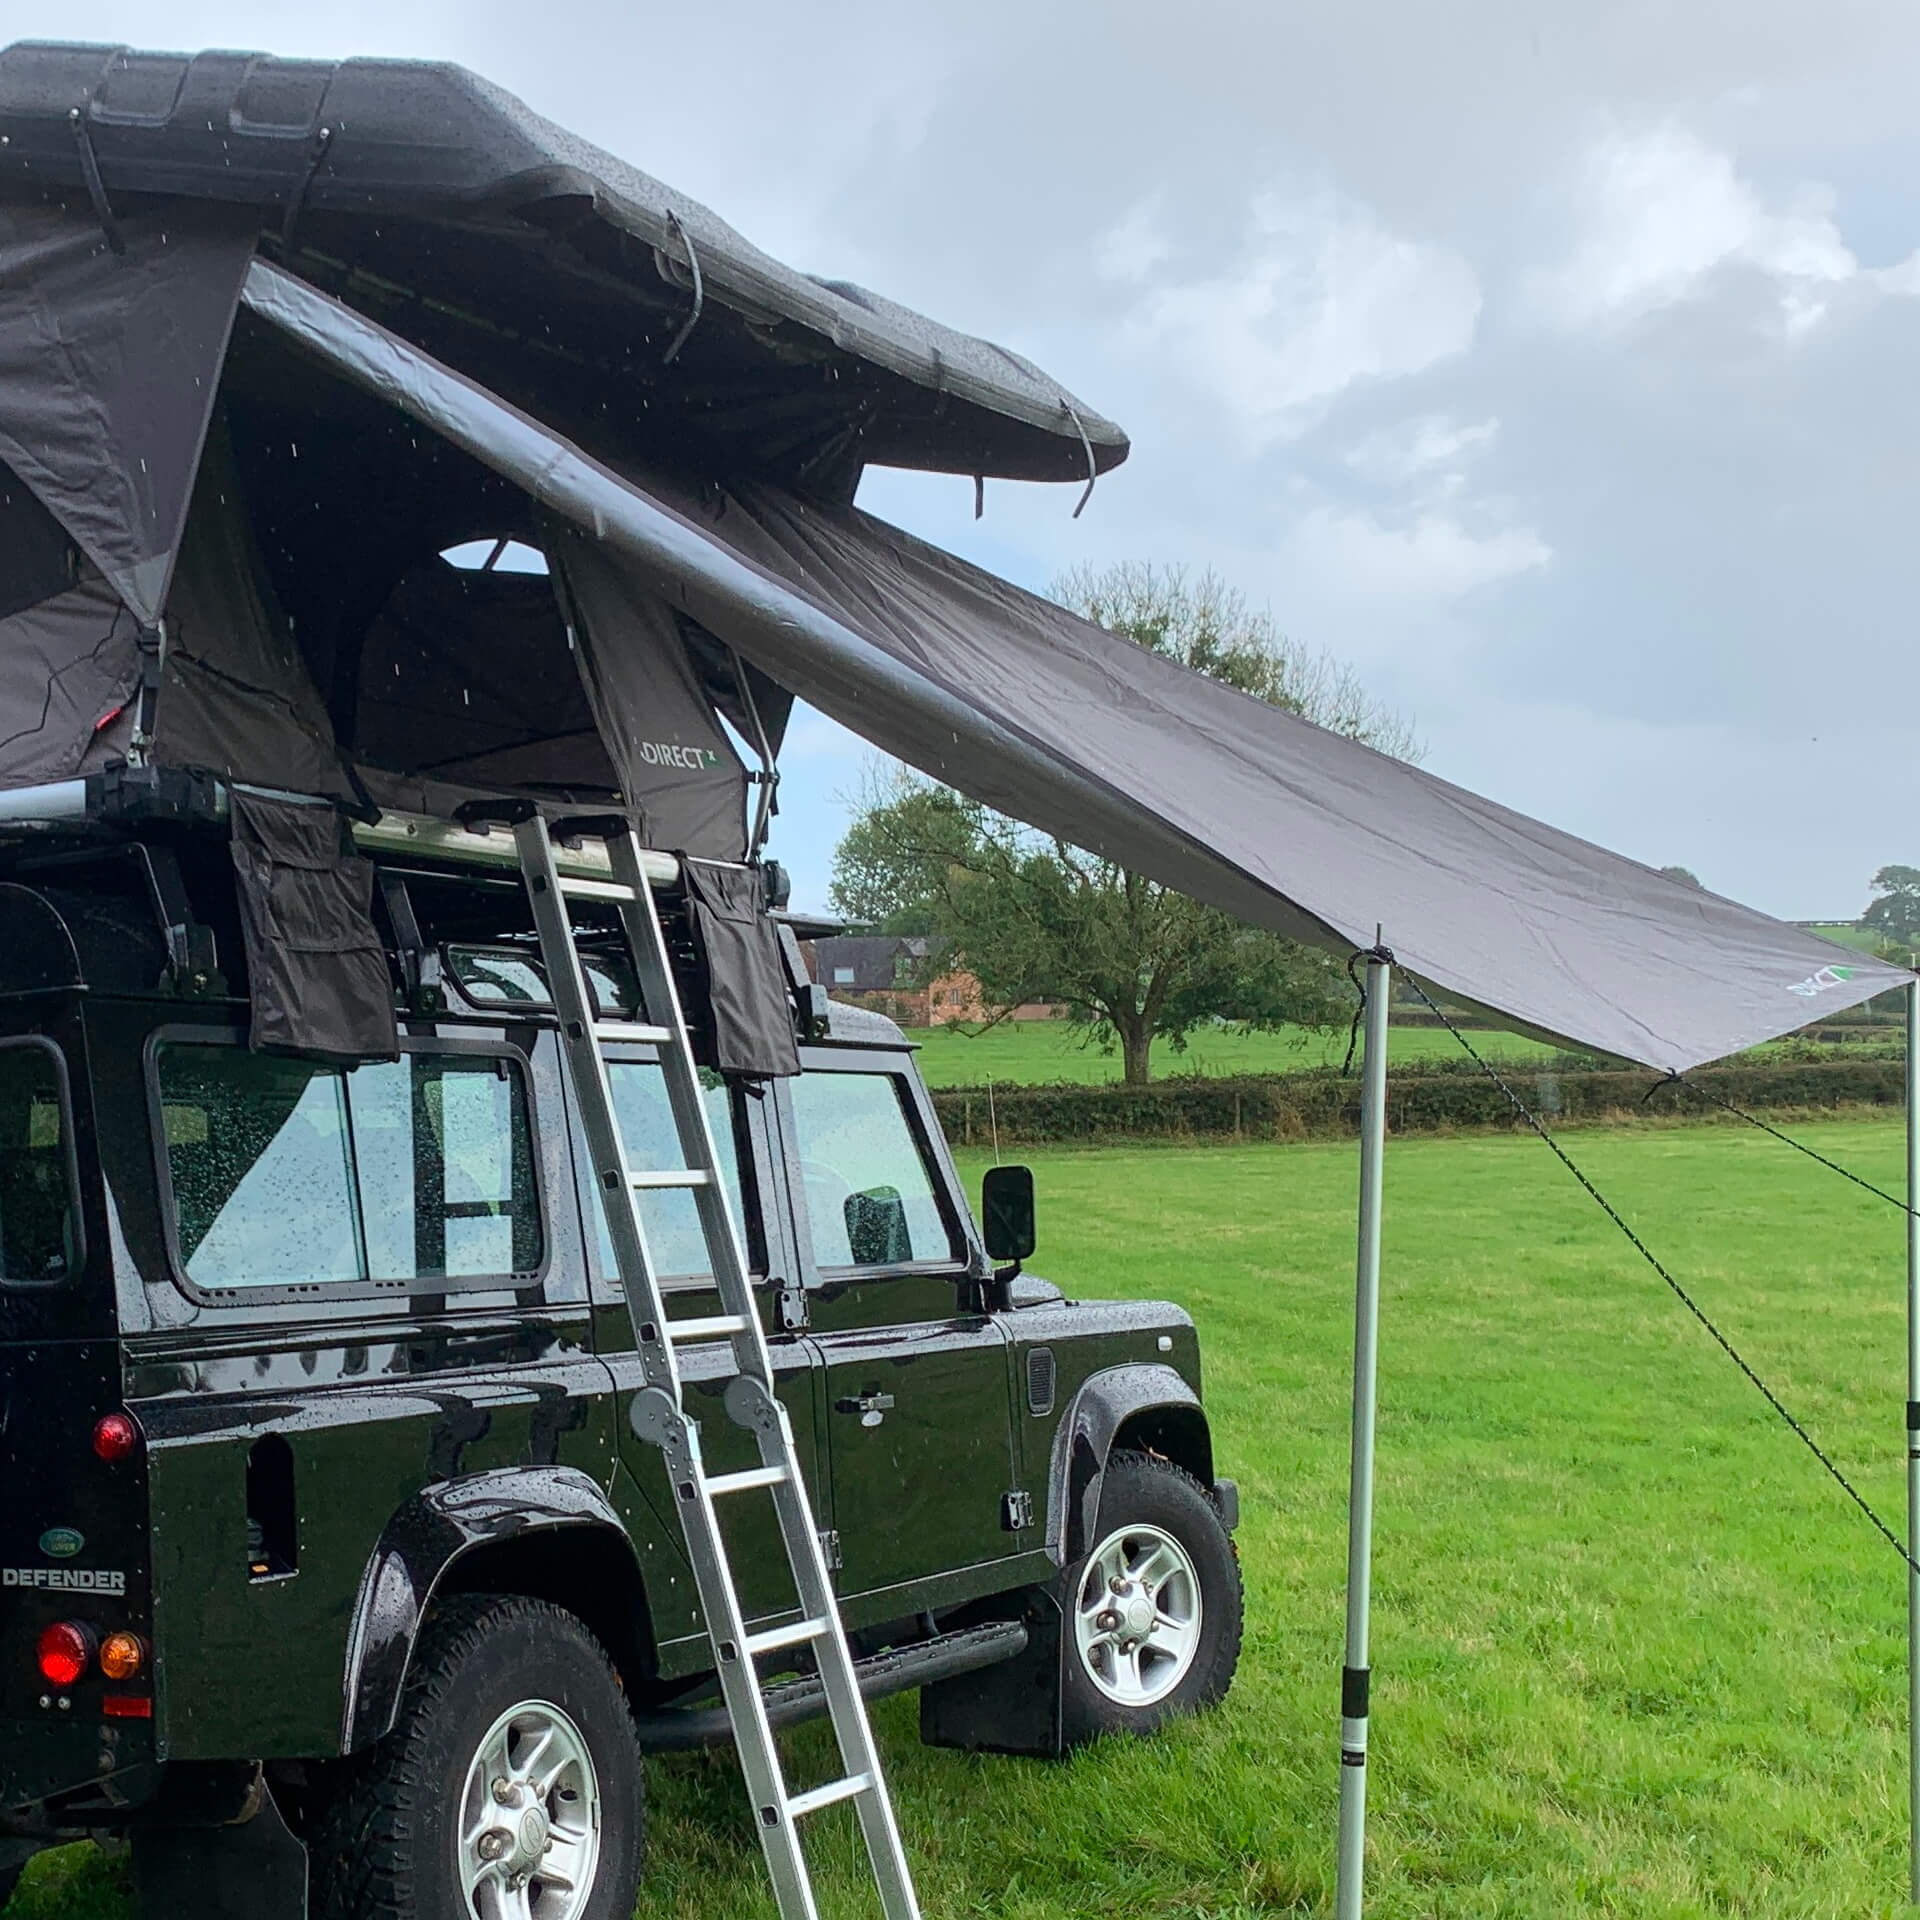 Forest Green Sun Shade Awning Canopy for Direct4x4 Pathseeker Roof Top Tent -  - sold by Direct4x4